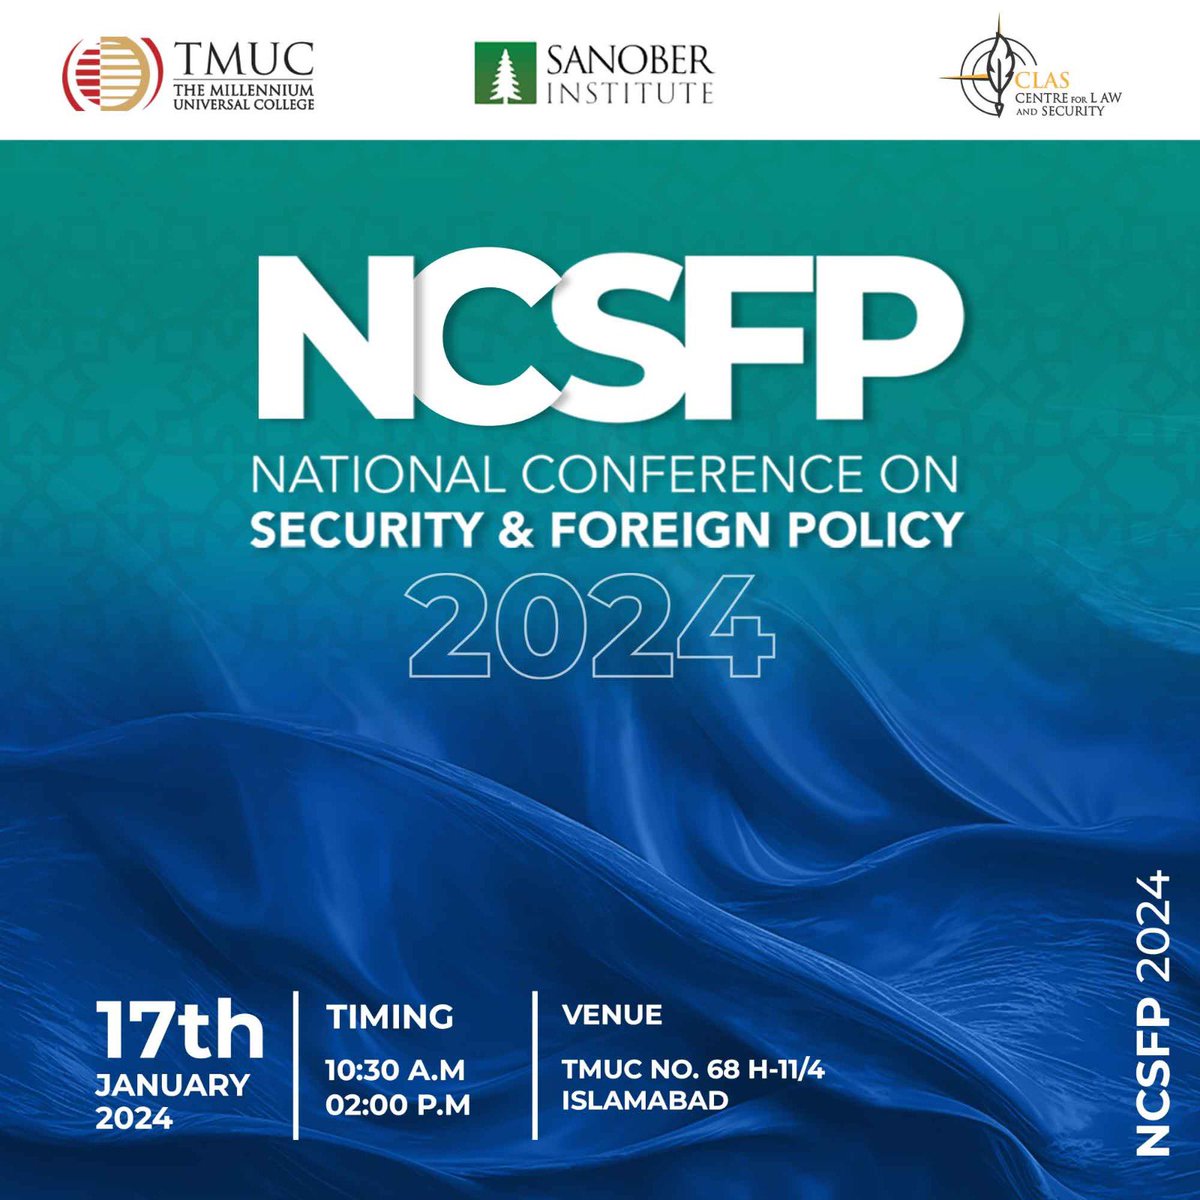 The Sanober Institute (SI), in collaboration with The Millennium Universal College (TMUC) and the Centre for Law and Security (CLAS), organising Conference on January 17, 2024.